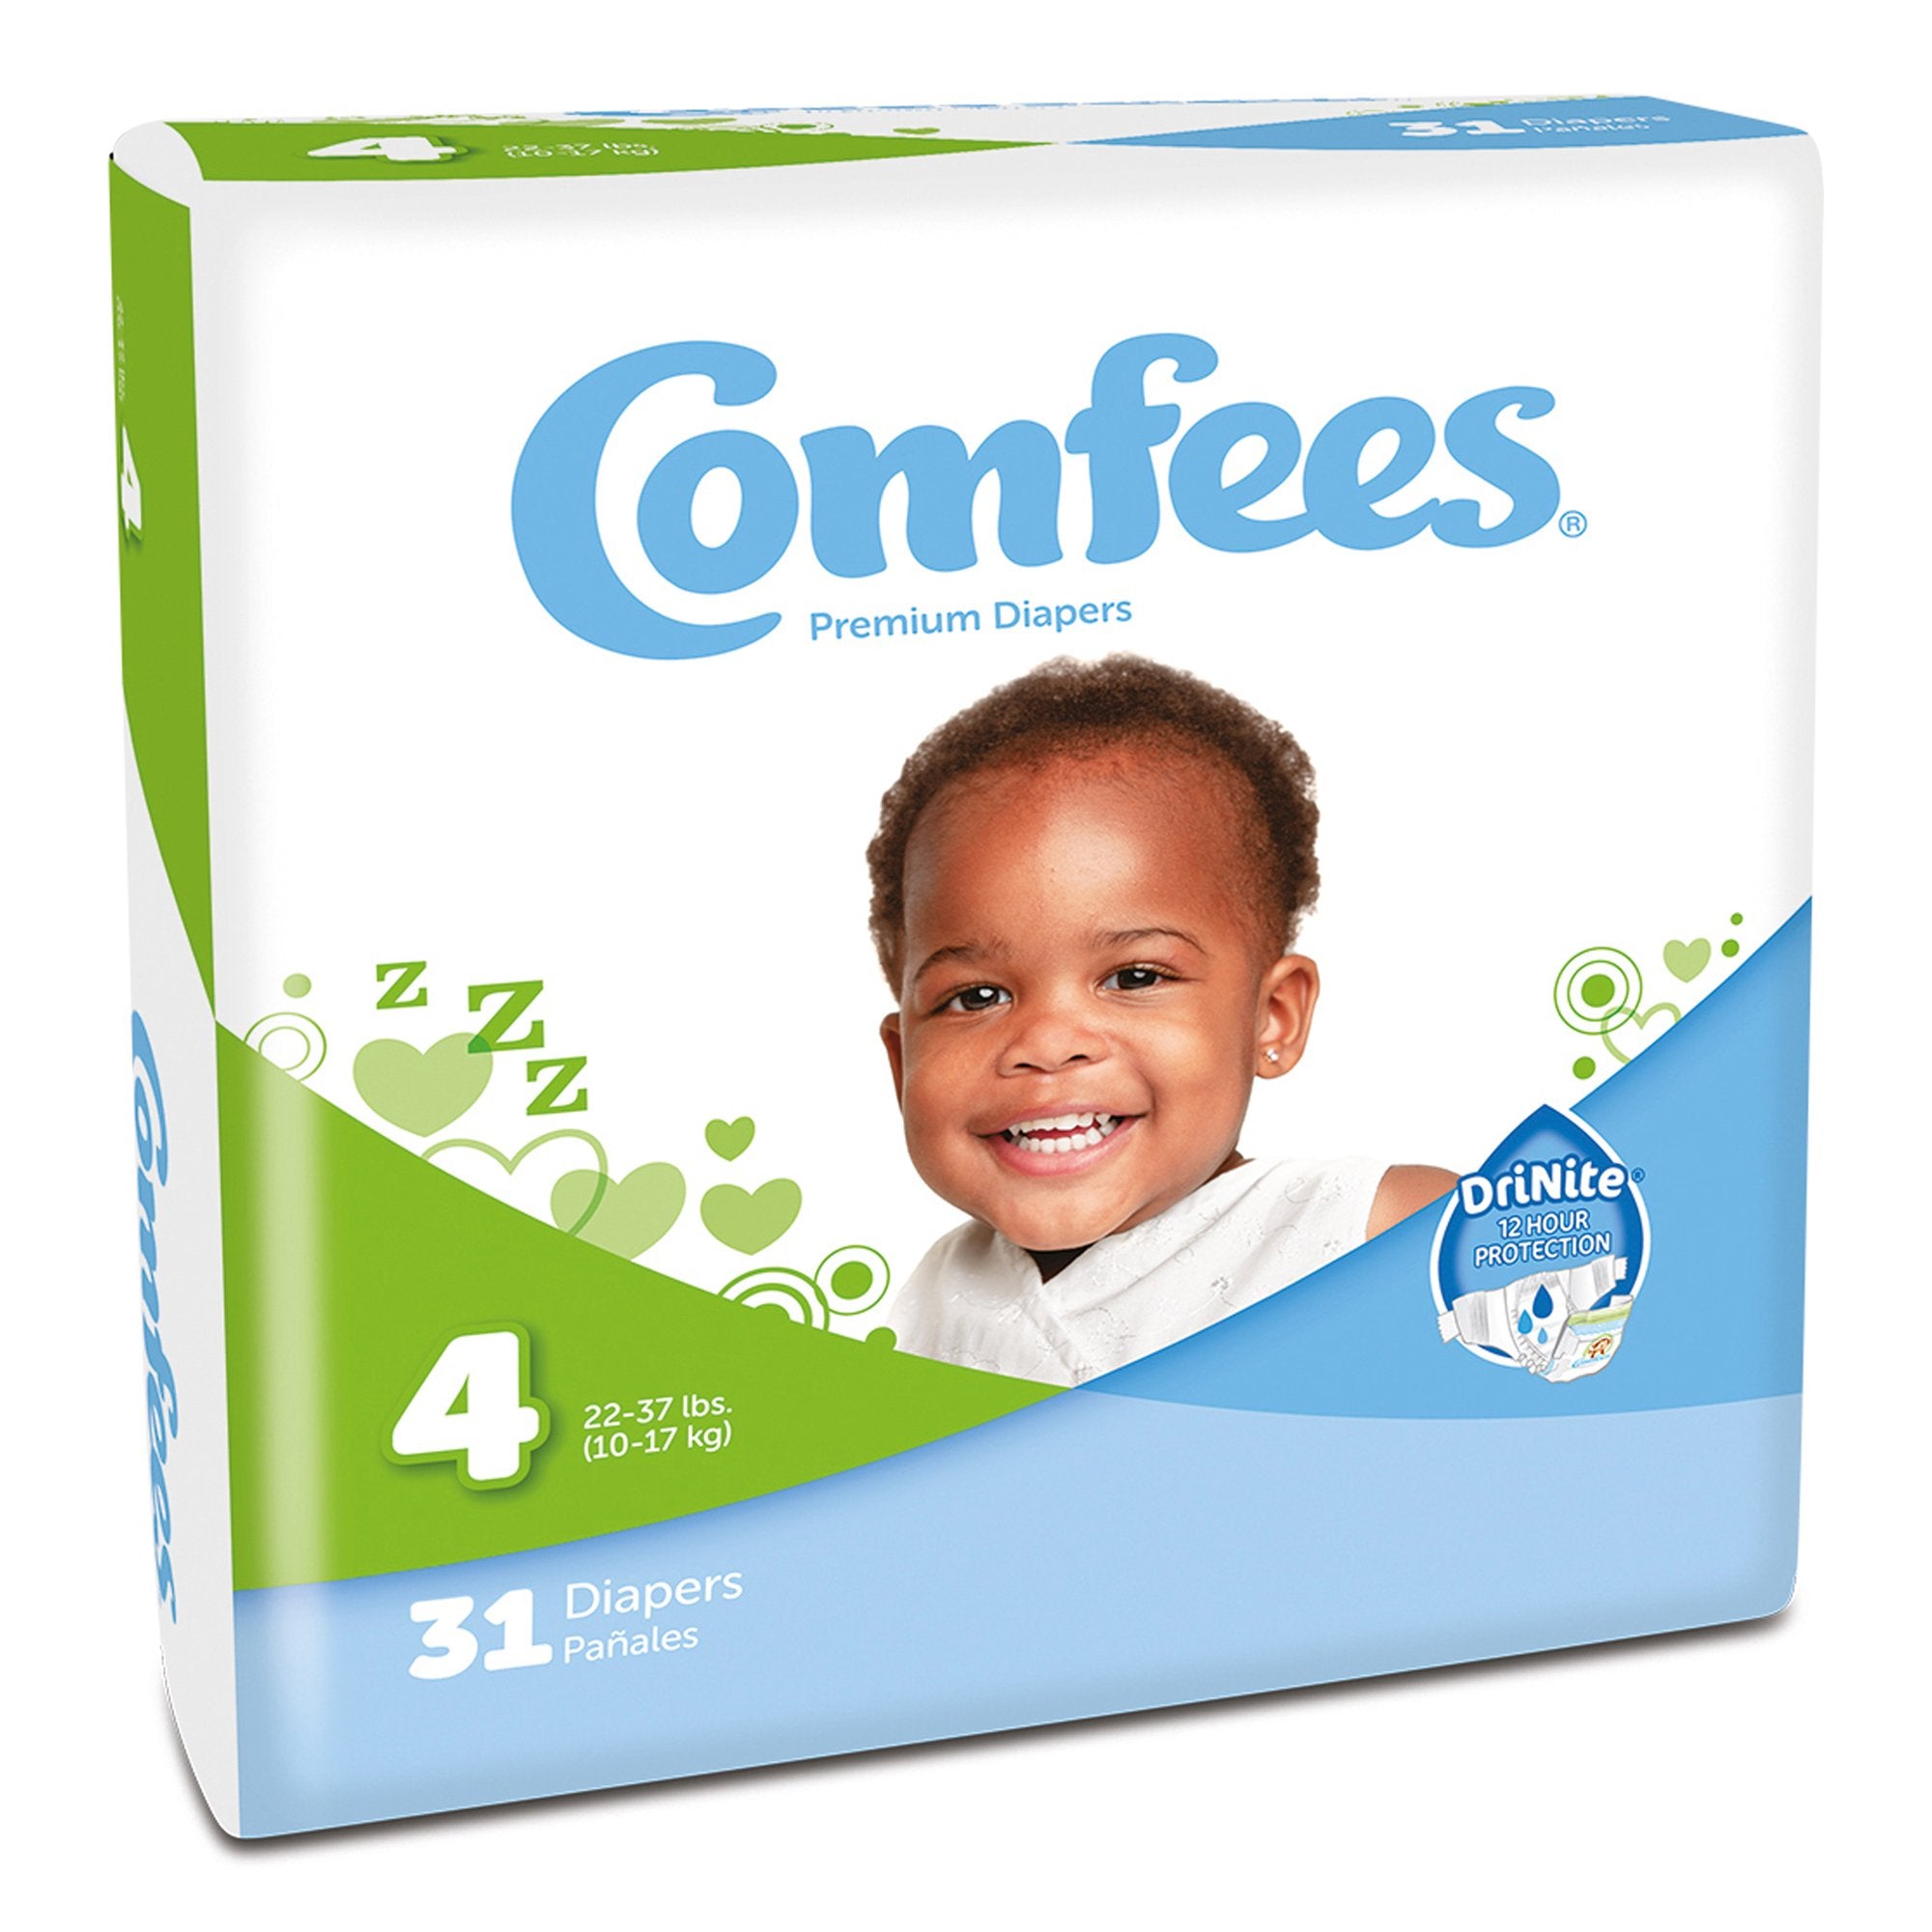 Unisex Baby Diaper Comfees Size 4 Disposable Moderate Absorbency